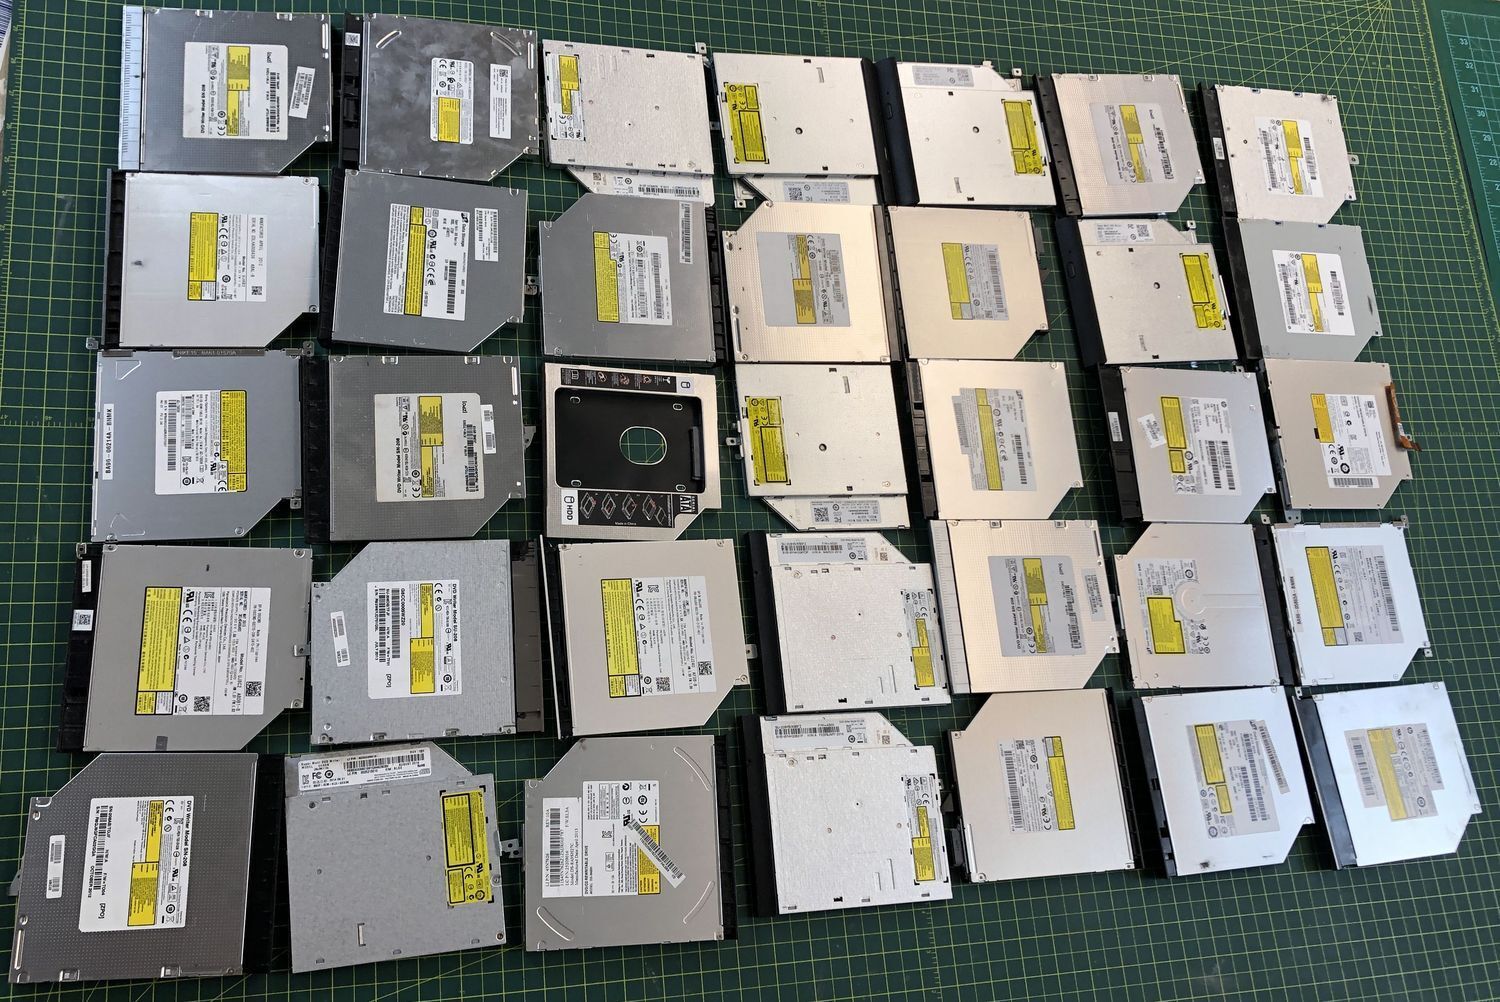 Lot of 35 Mix Brand DVD Drives for HP ASUS Acer Lenonvo Dell Sony Toshiba etc 16